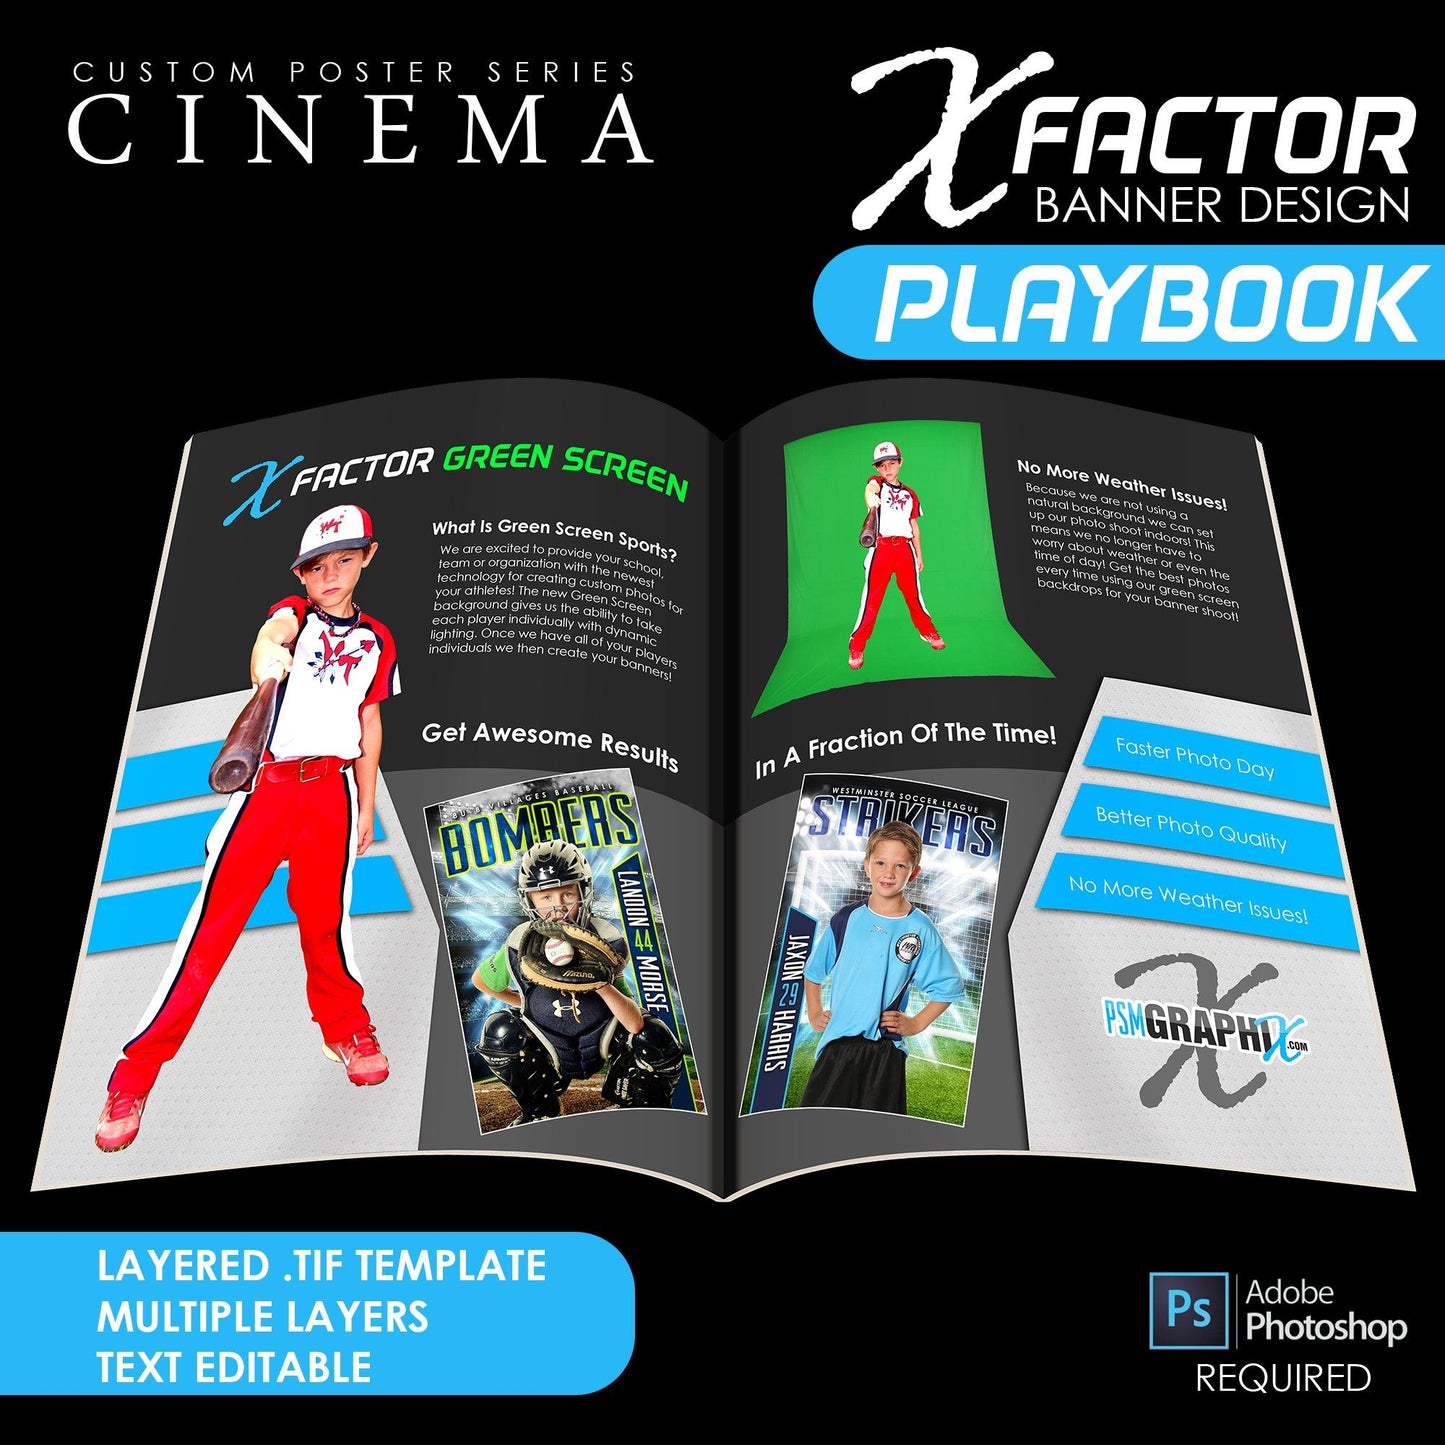 X-Factor - BANNER FULL SET BUNDLE - 2022 Limited Show Special Offer-Photoshop Template - PSMGraphix